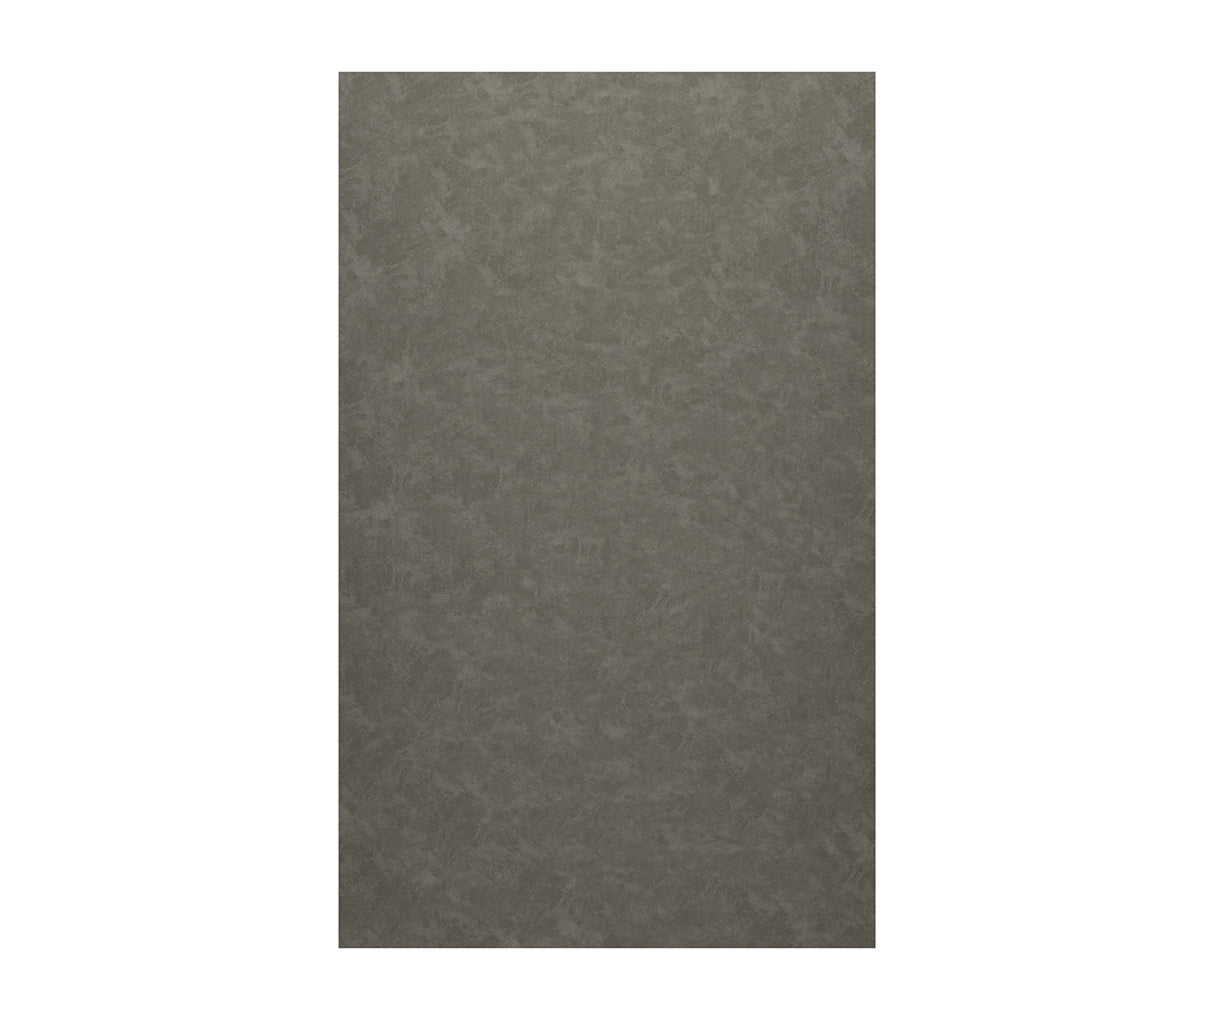 Swanstone SS-6060-1 60 x 60 Swanstone Smooth Glue up Bath Single Wall Panel in Charcoal Gray SS0606001.209